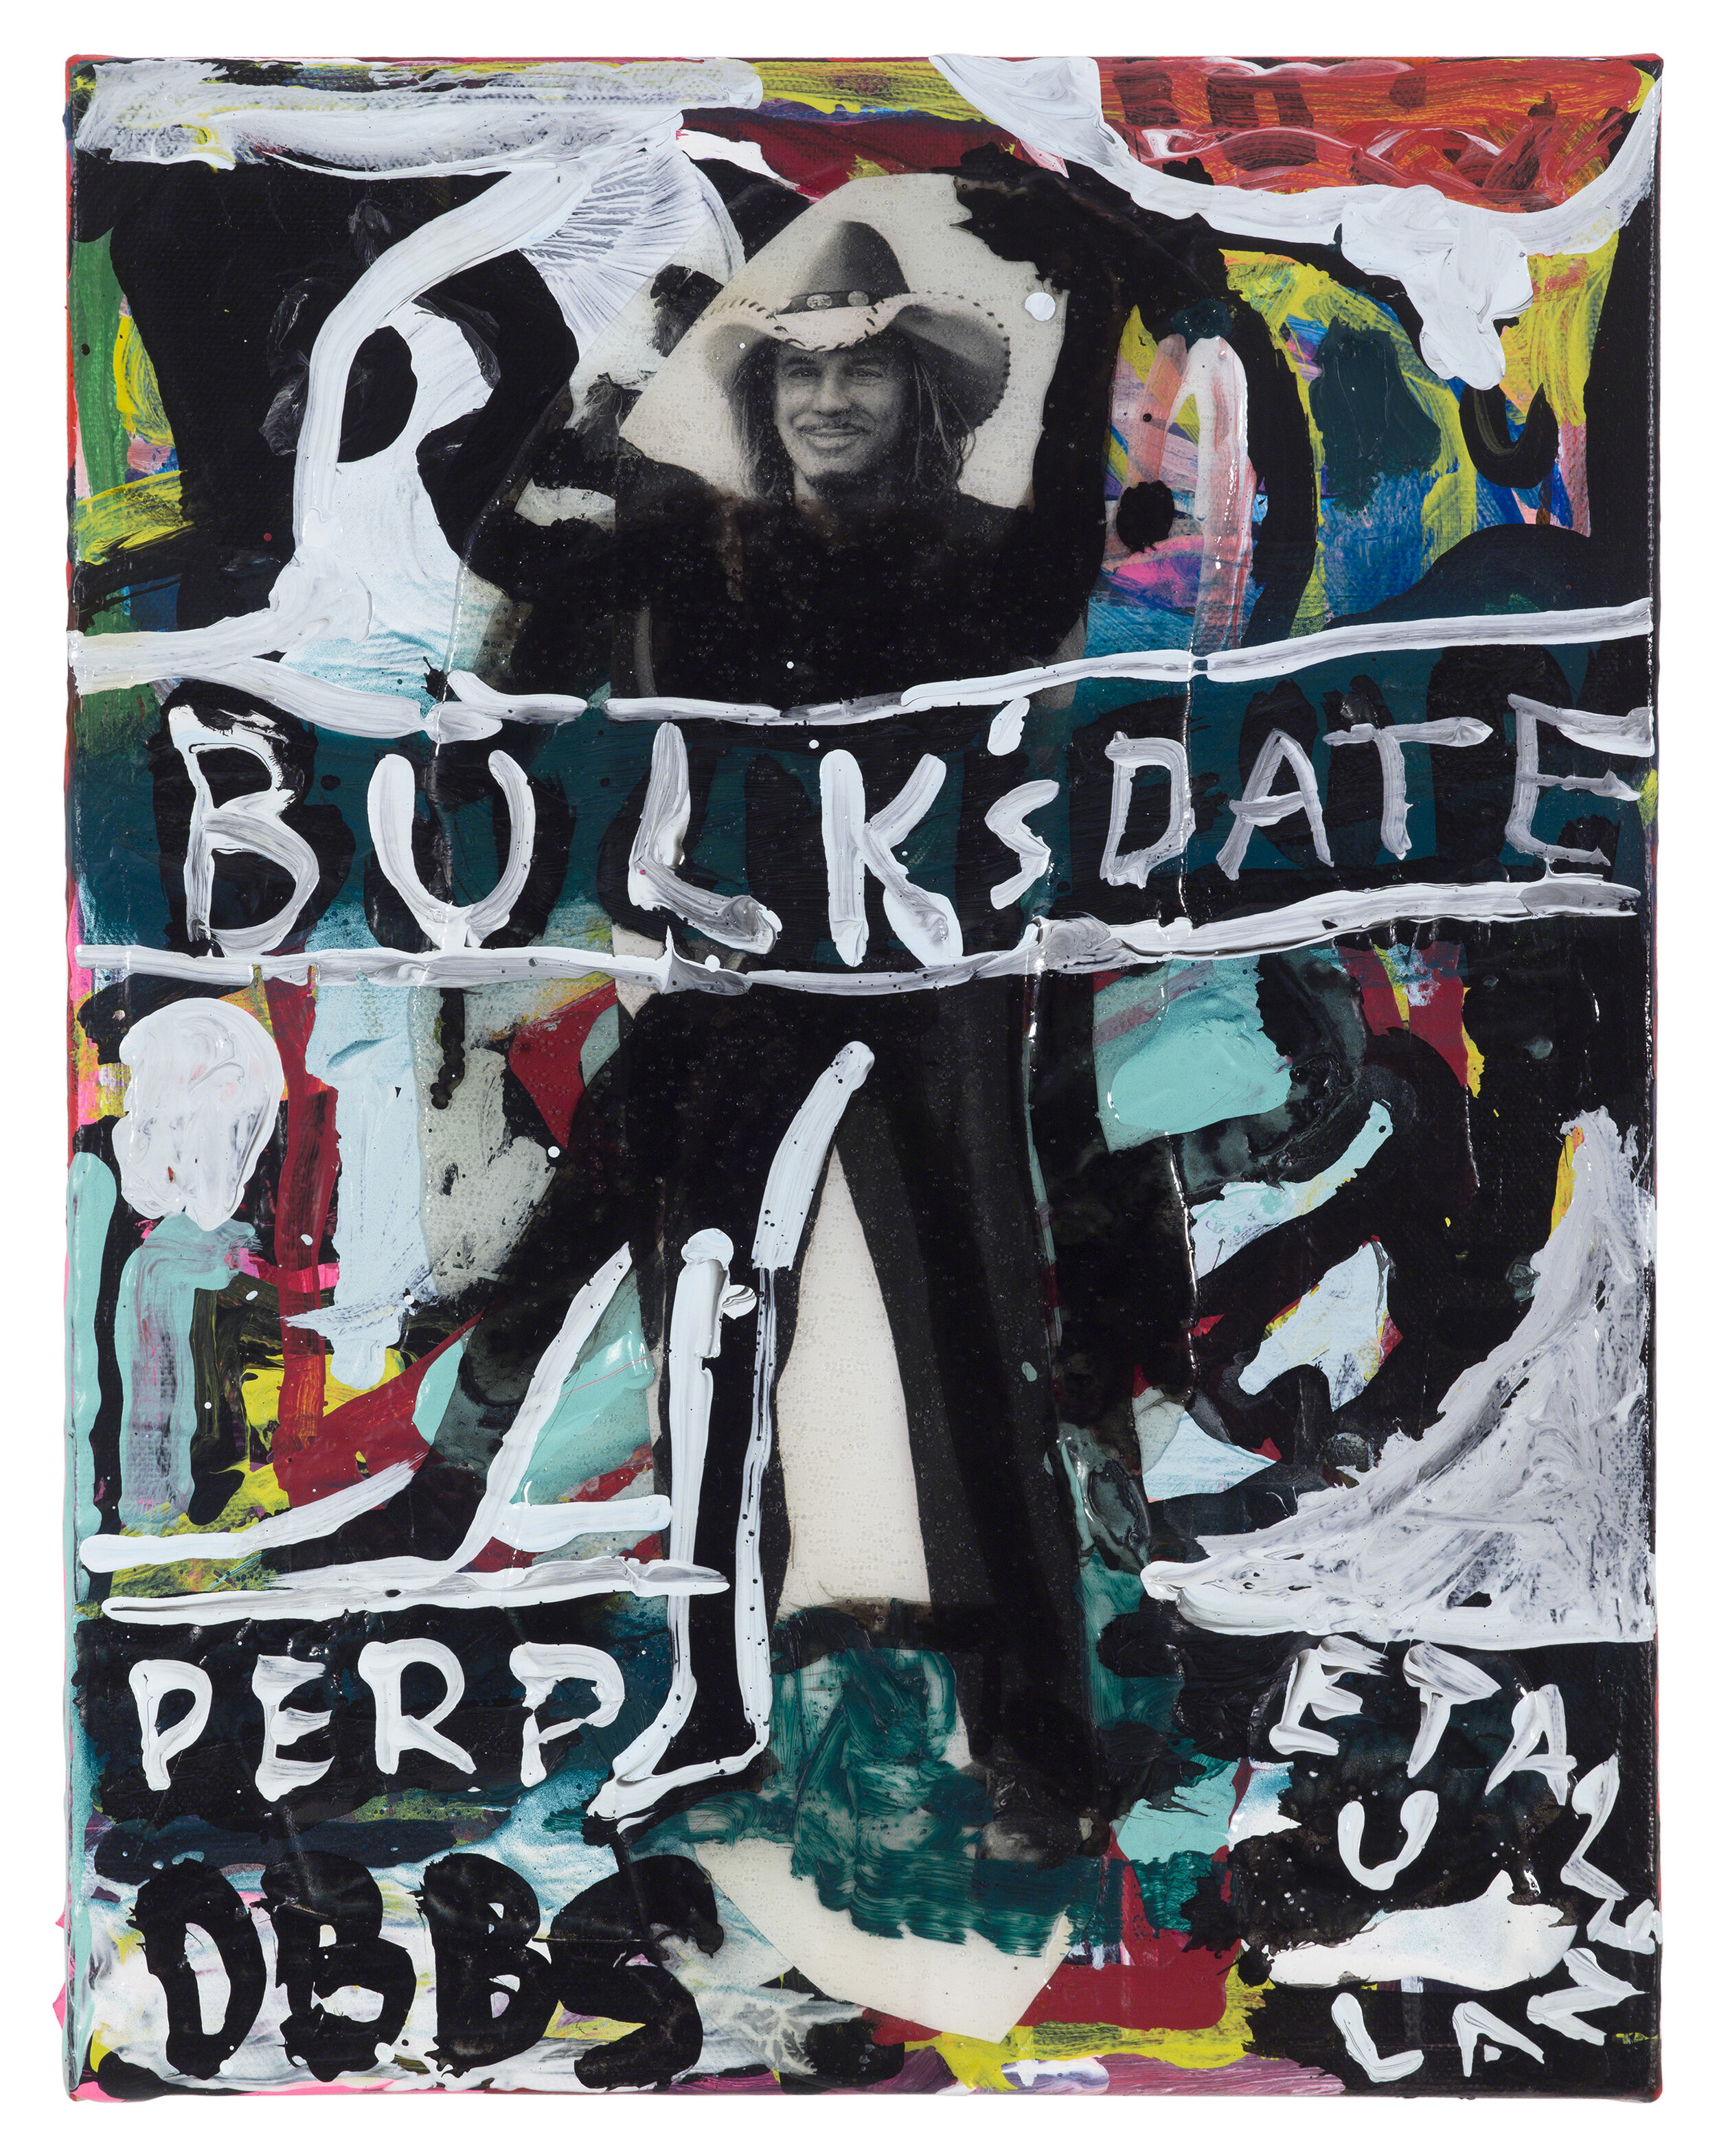  Drew Beattie and Ben Shepard  Bulk’s Date   2019 acrylic and collage on canvas 14 x 11 inches 